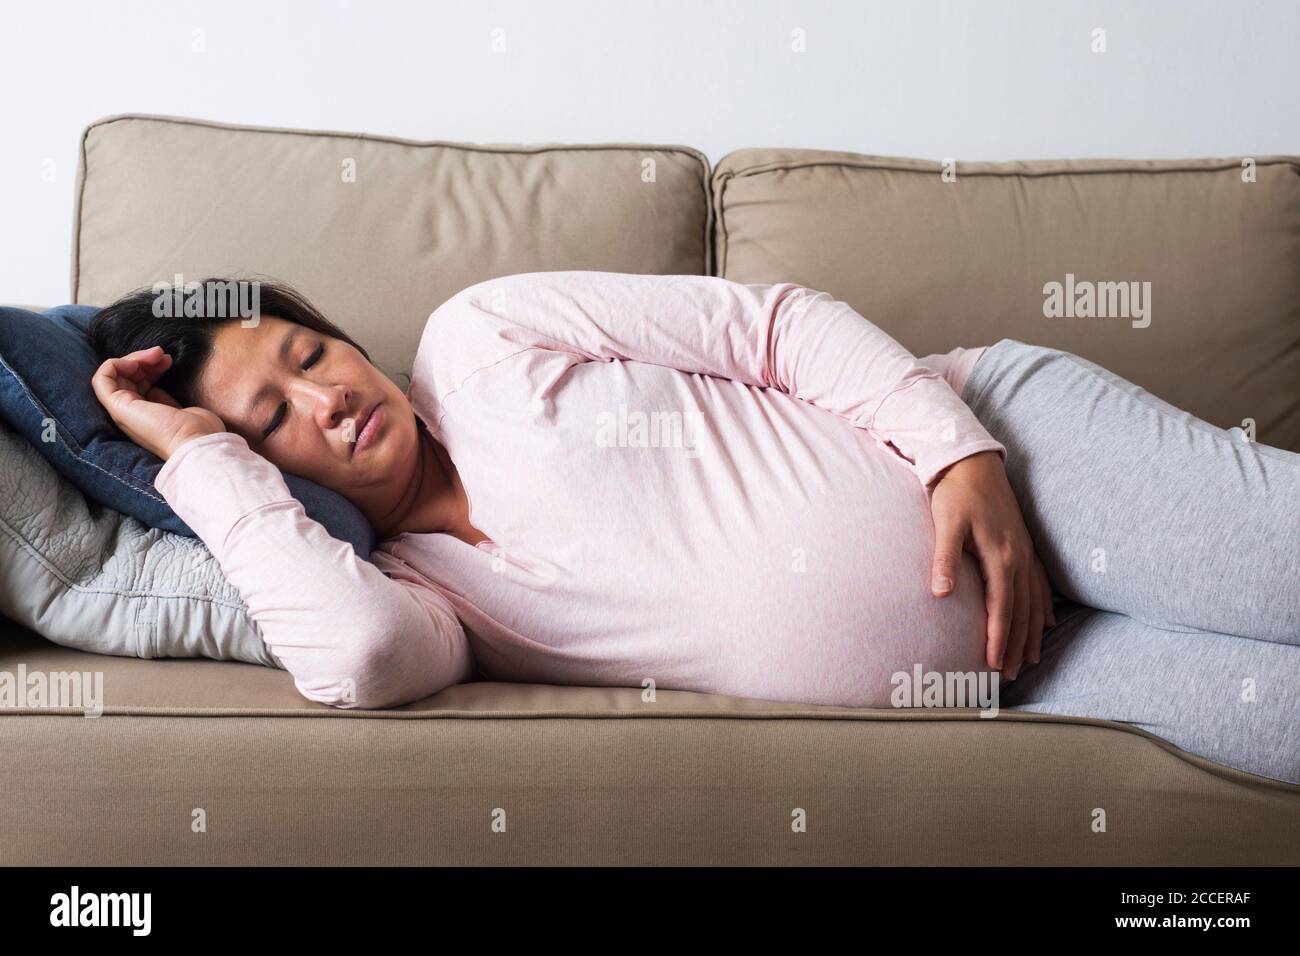 Tired pregnant woman Stock Photo